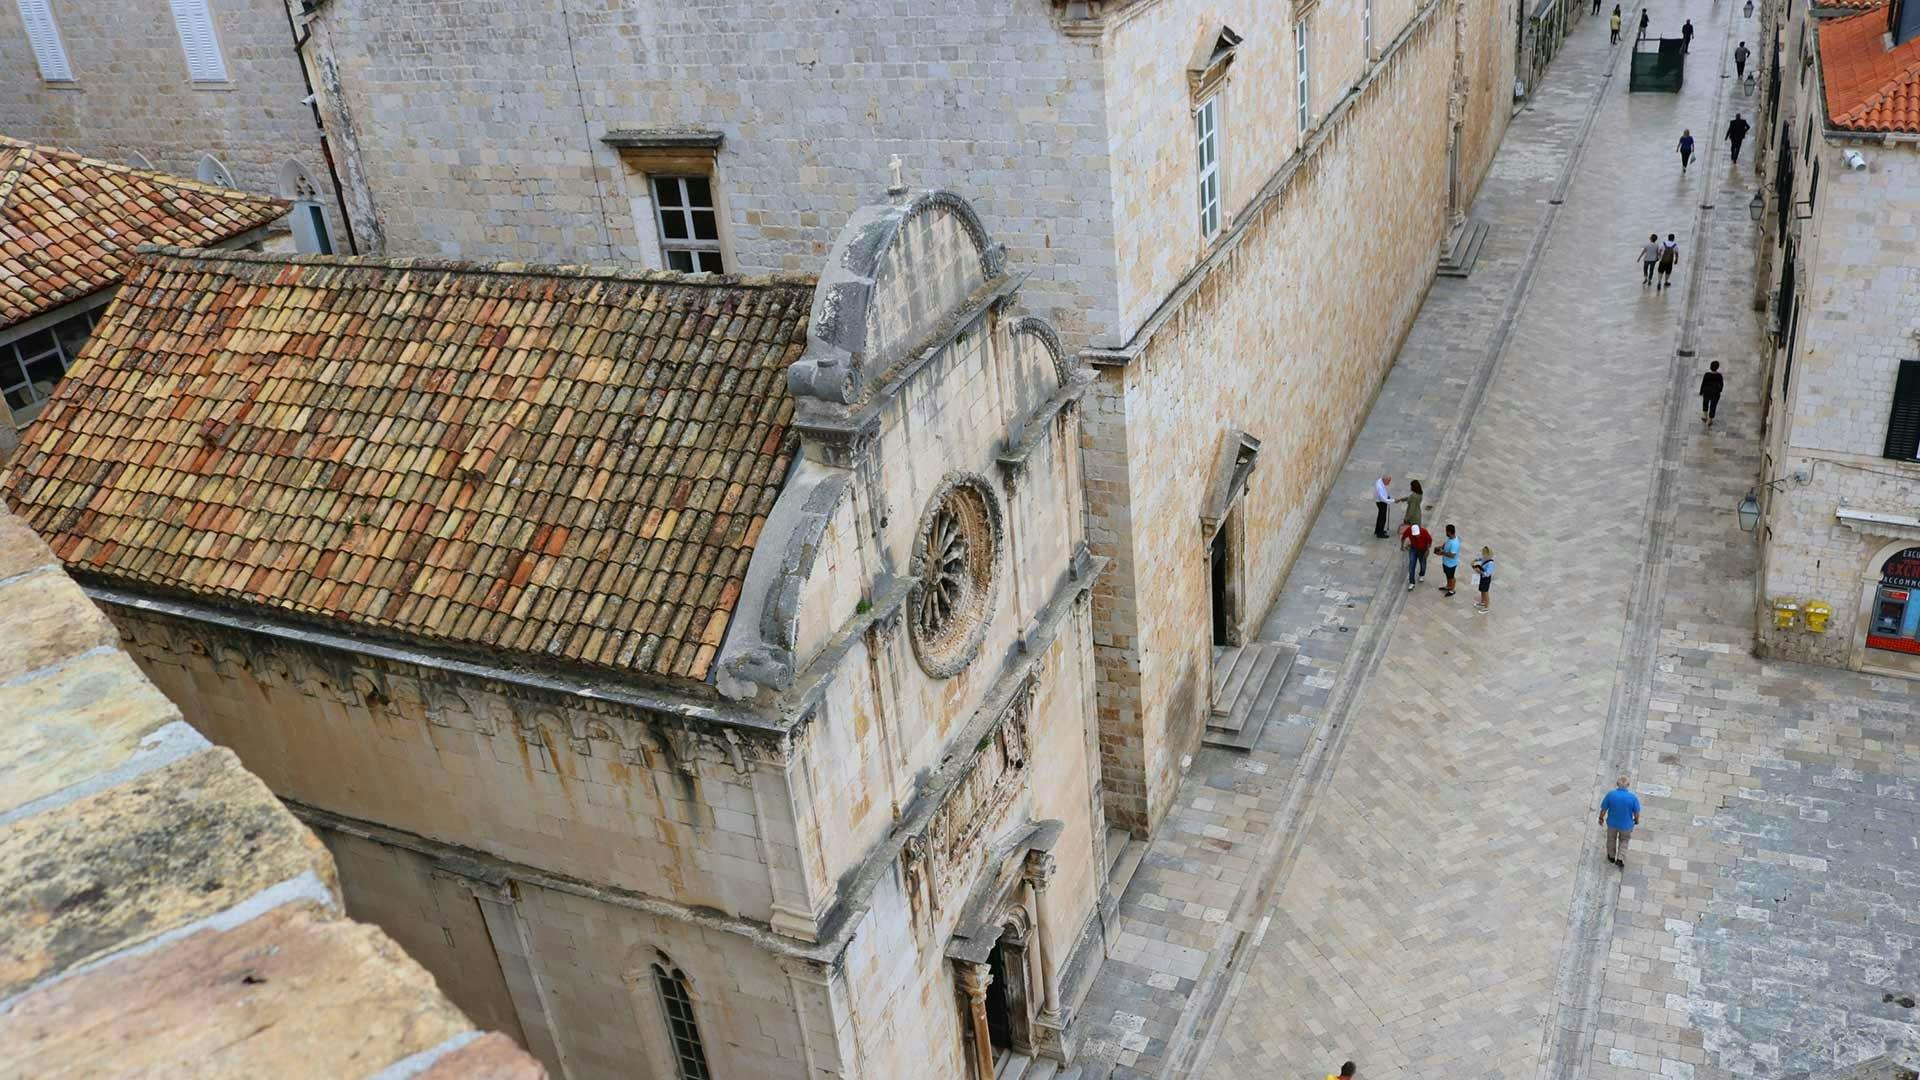 Dubrovnik Game of Thrones and city walls private tour